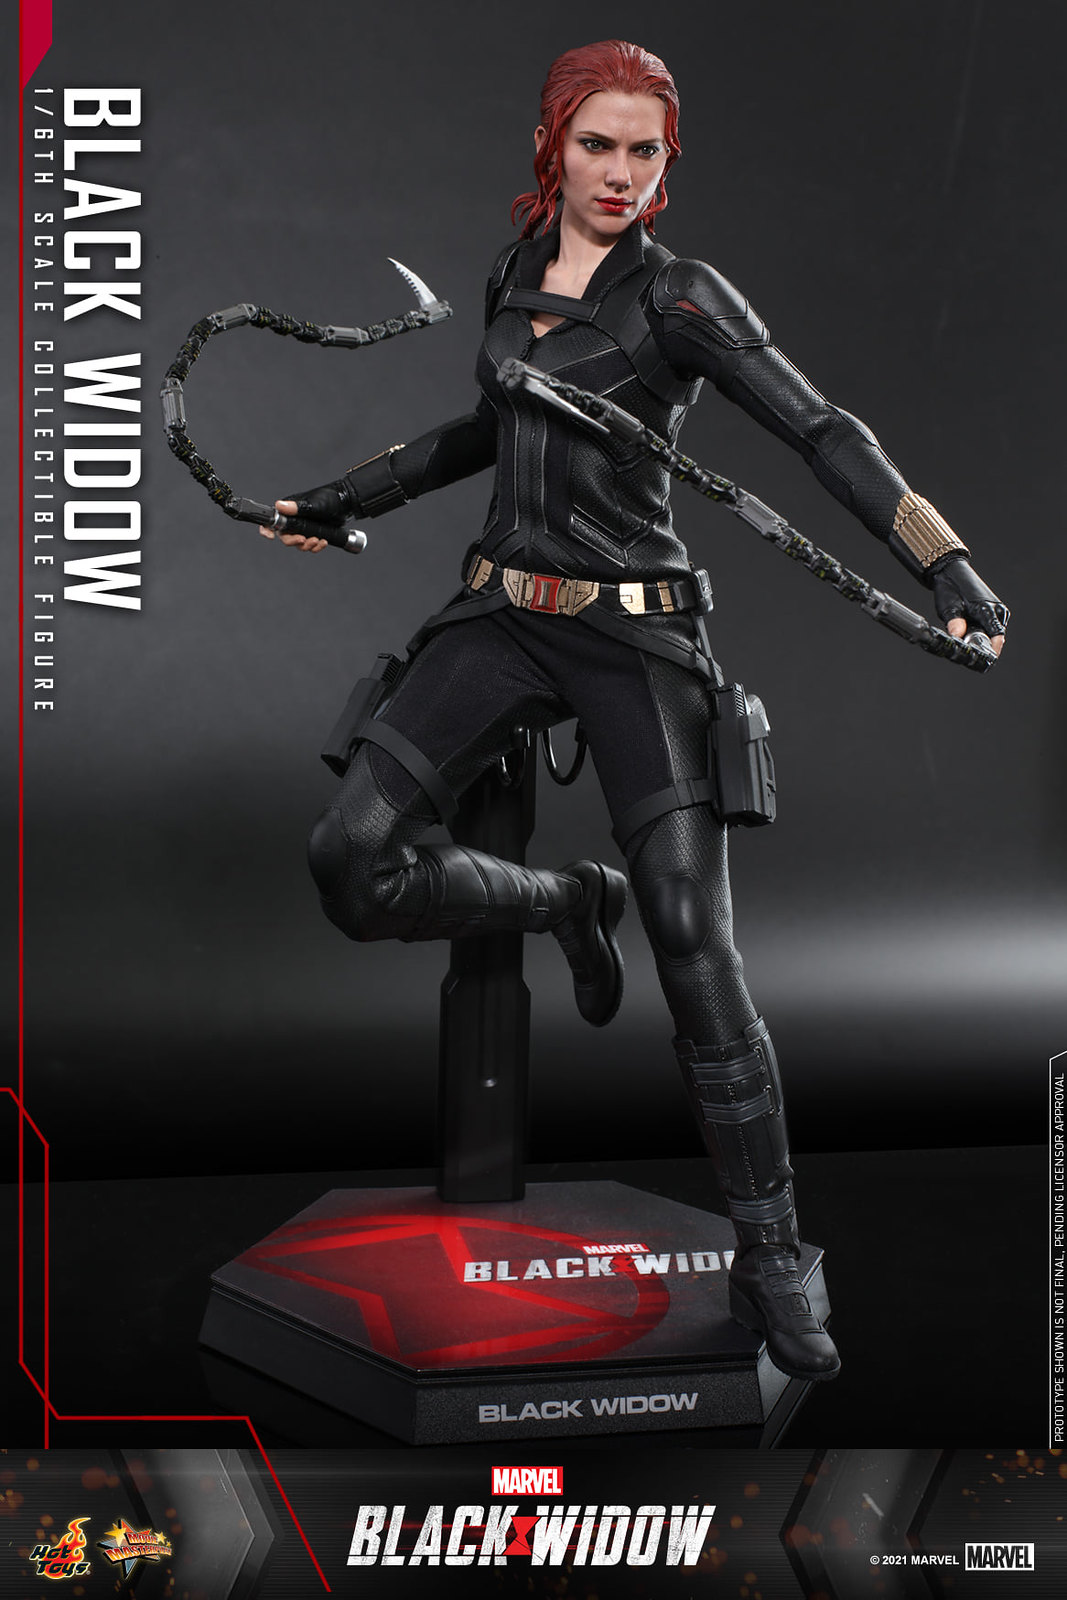 NEW PRODUCT: Hot Toys Black Widow - 1/6th scale Black Widow Collectible Figure 51310531732_0c58965022_h